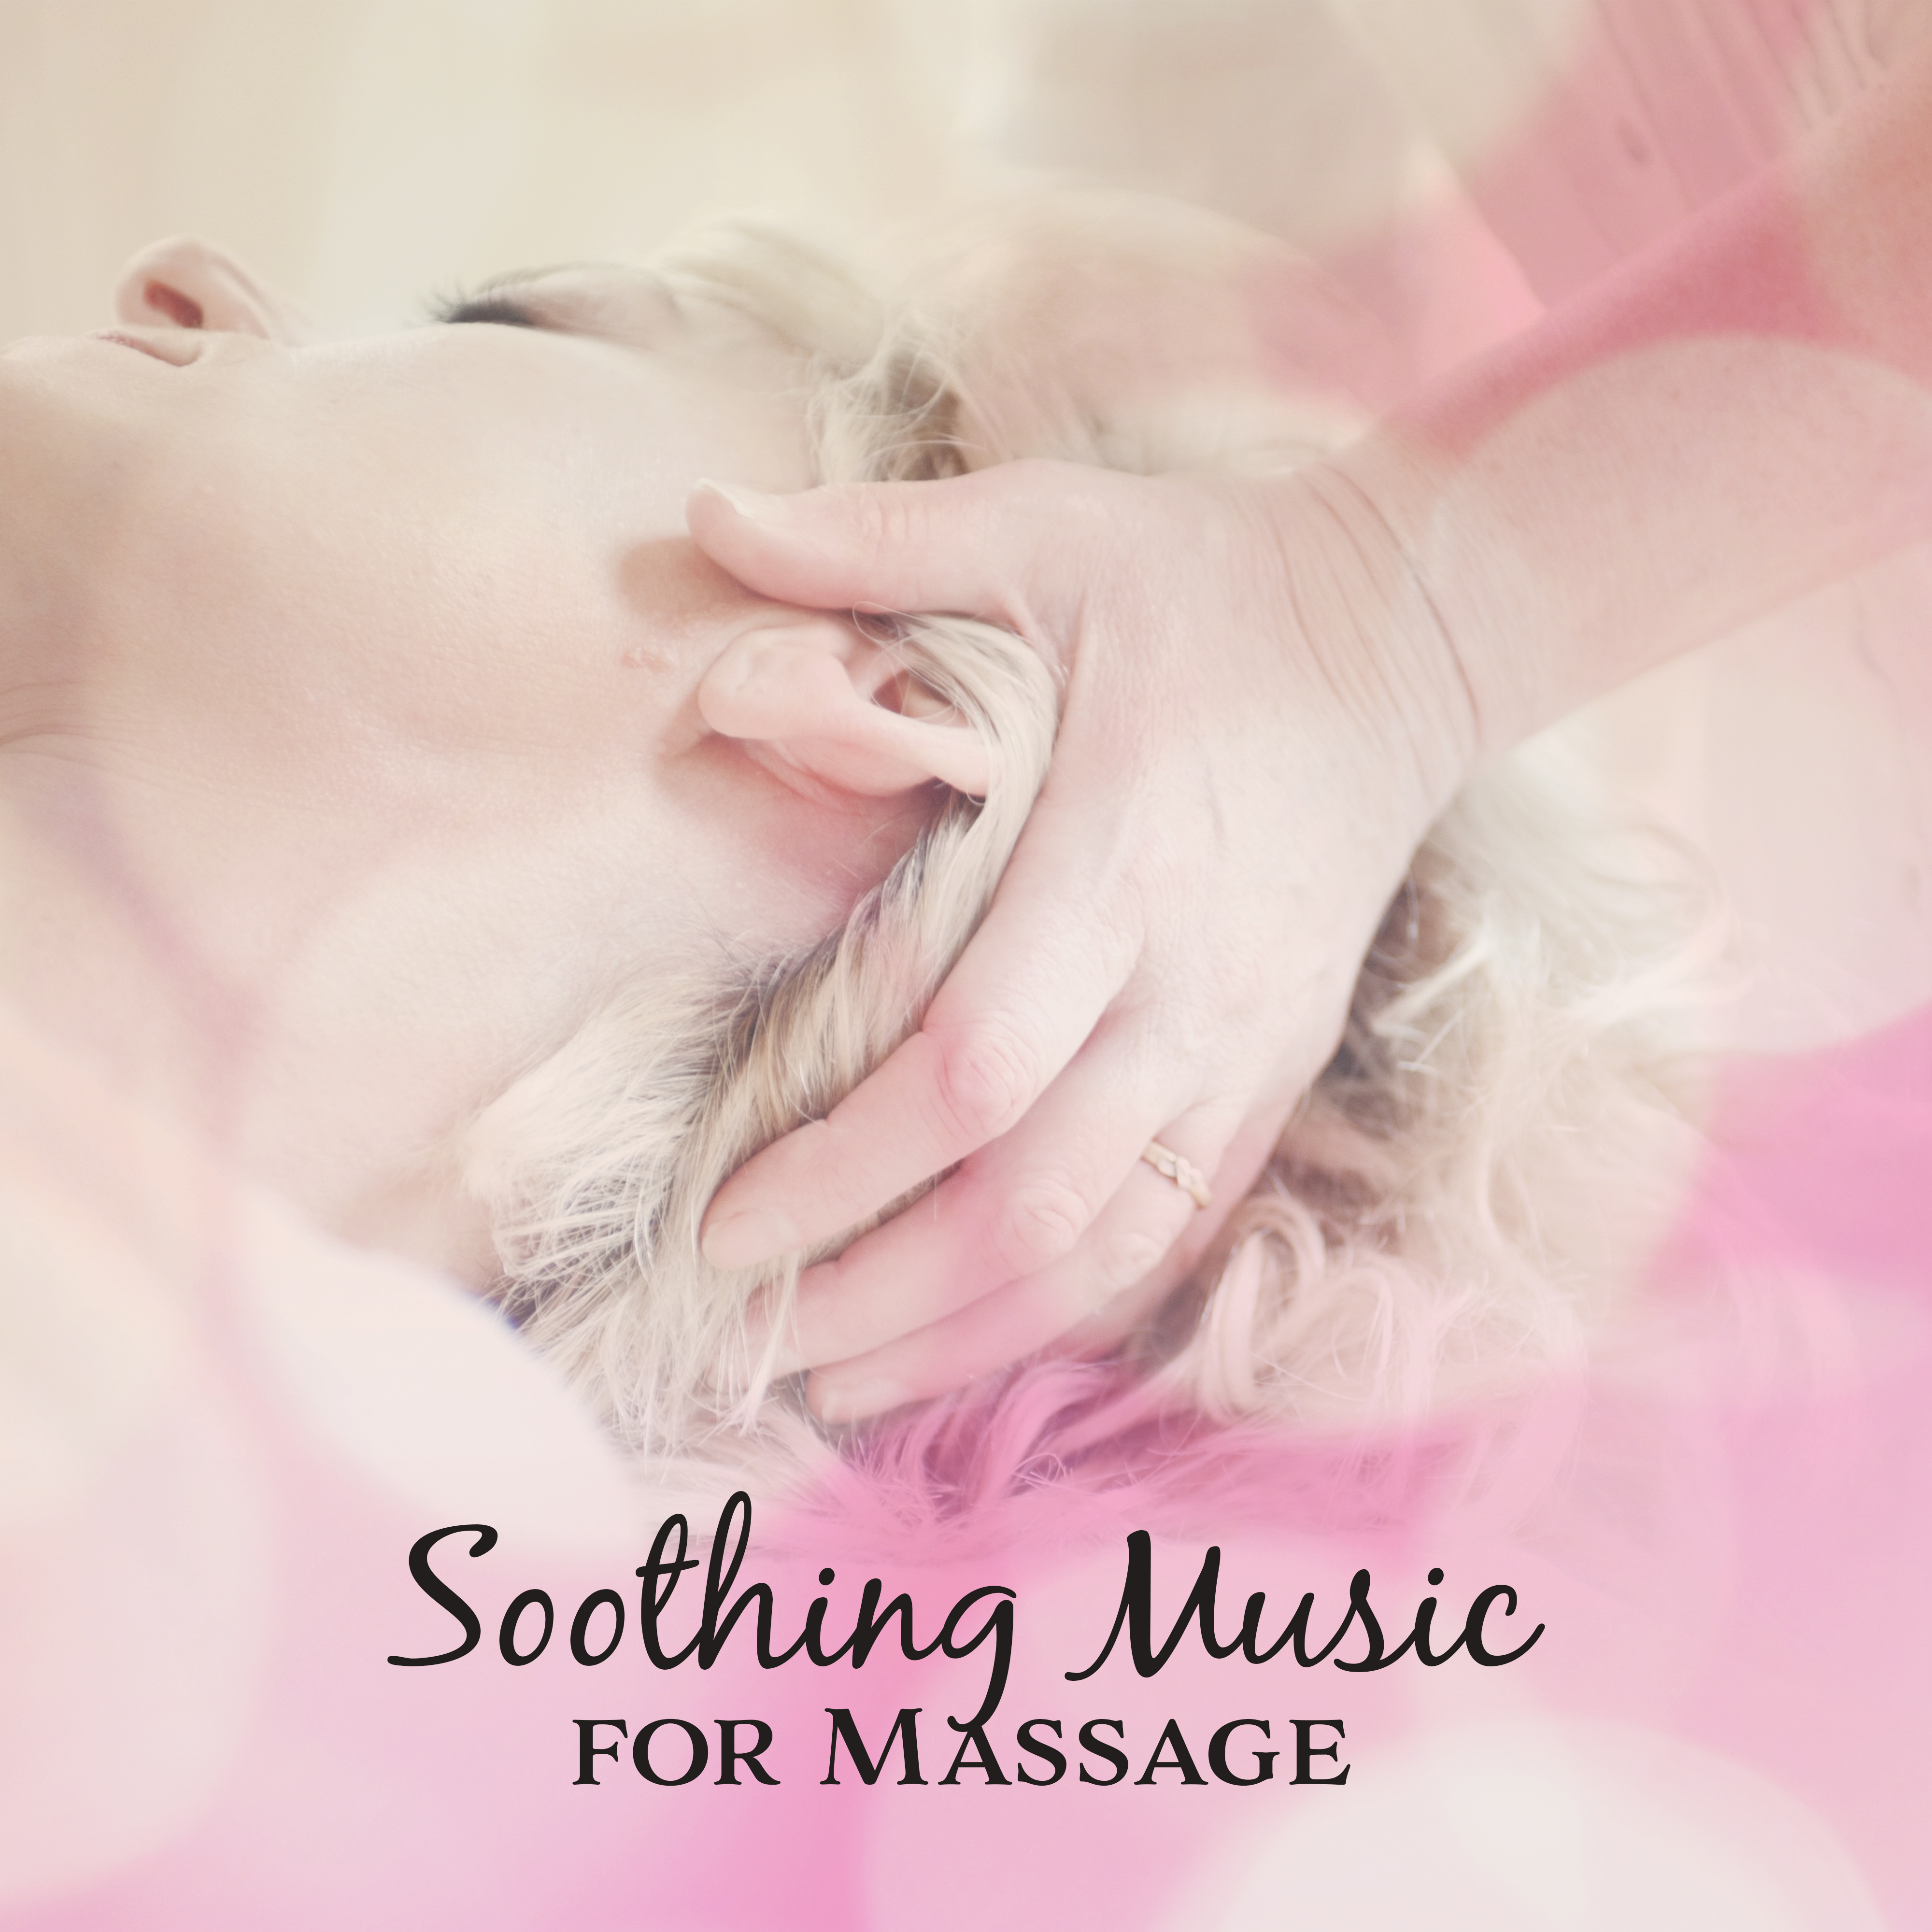 Soothing Music for Massage  Peaceful Sounds, Anti Stress Music, Pure Massage, Inner Zen, Relaxation Wellness, Spa Music, Tranquility